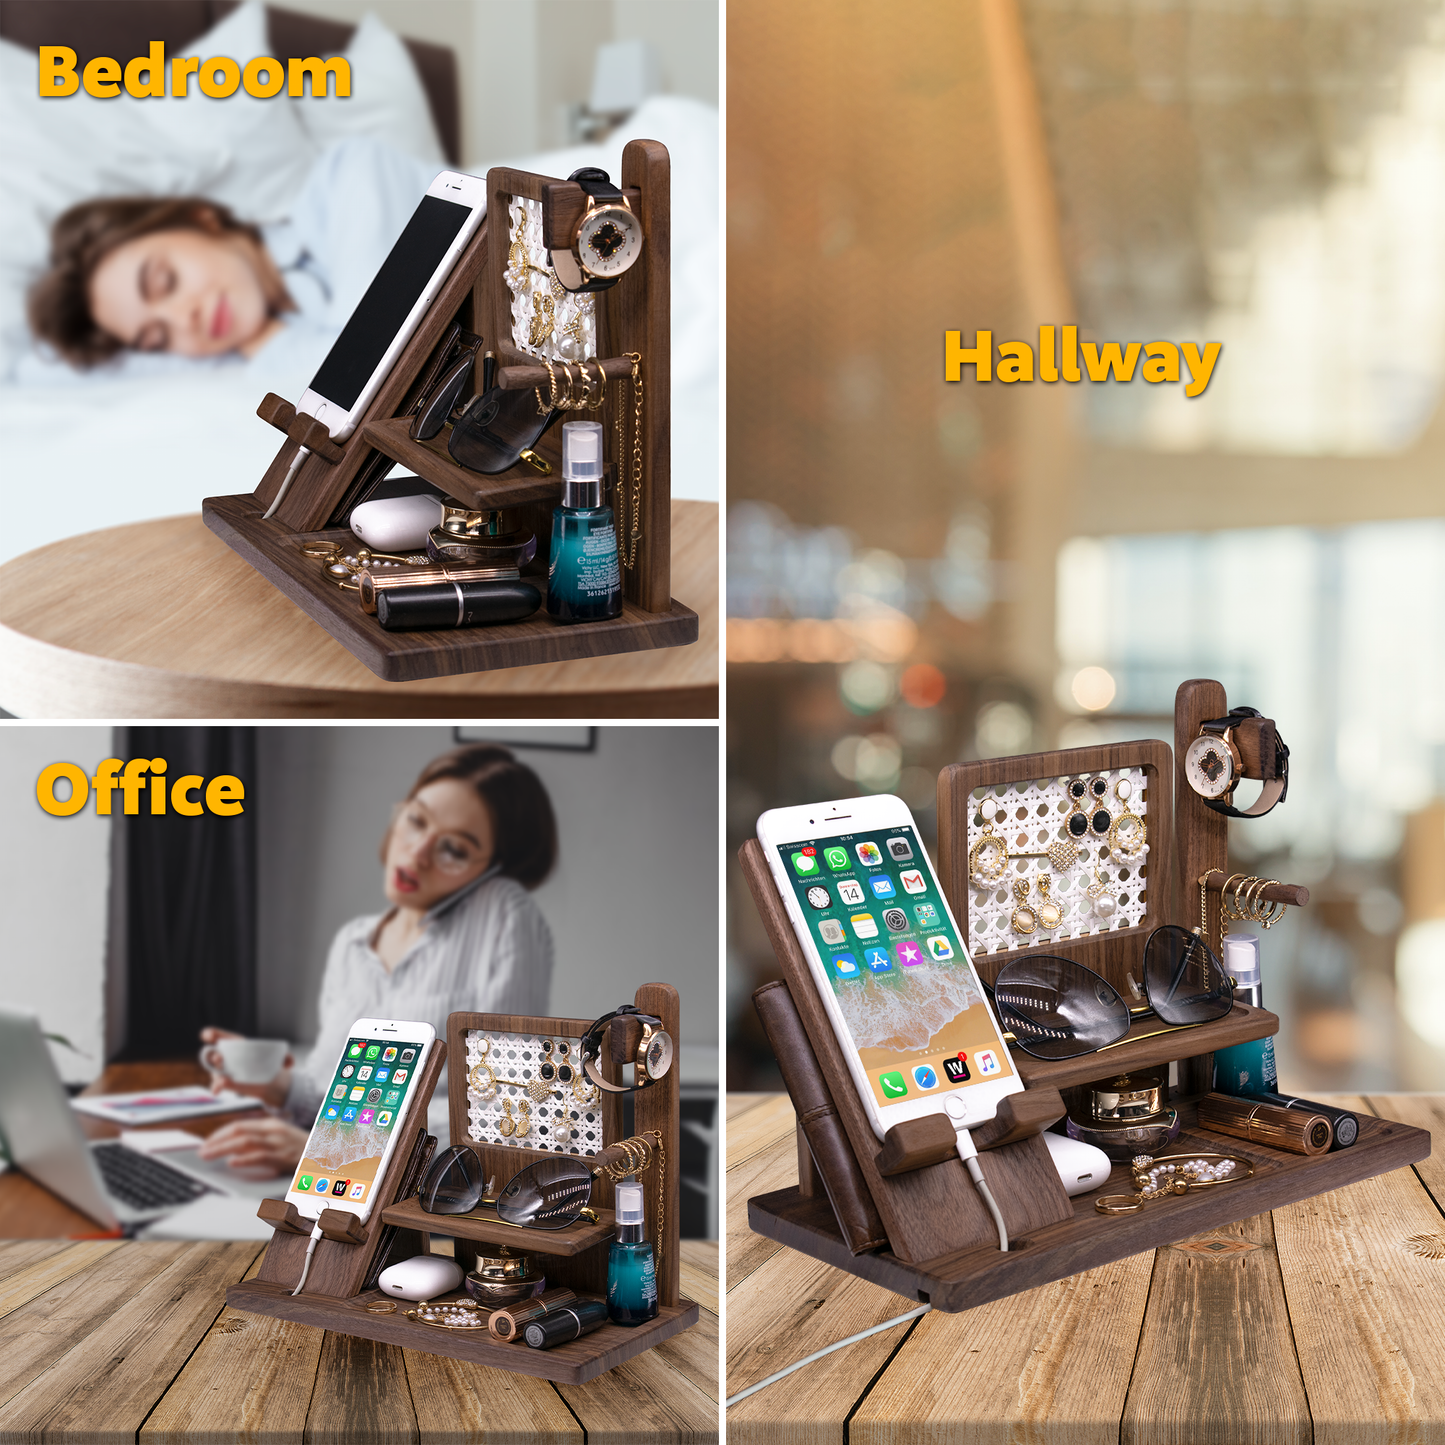 Wood Nightstand Organizer for Couple - Personalized Phone Docking Station for Wife, Girlfriend - Unique Gift Idea with Rattan Jewelry Holder, Makeup Holder, Glasses Station for Mother, Sister